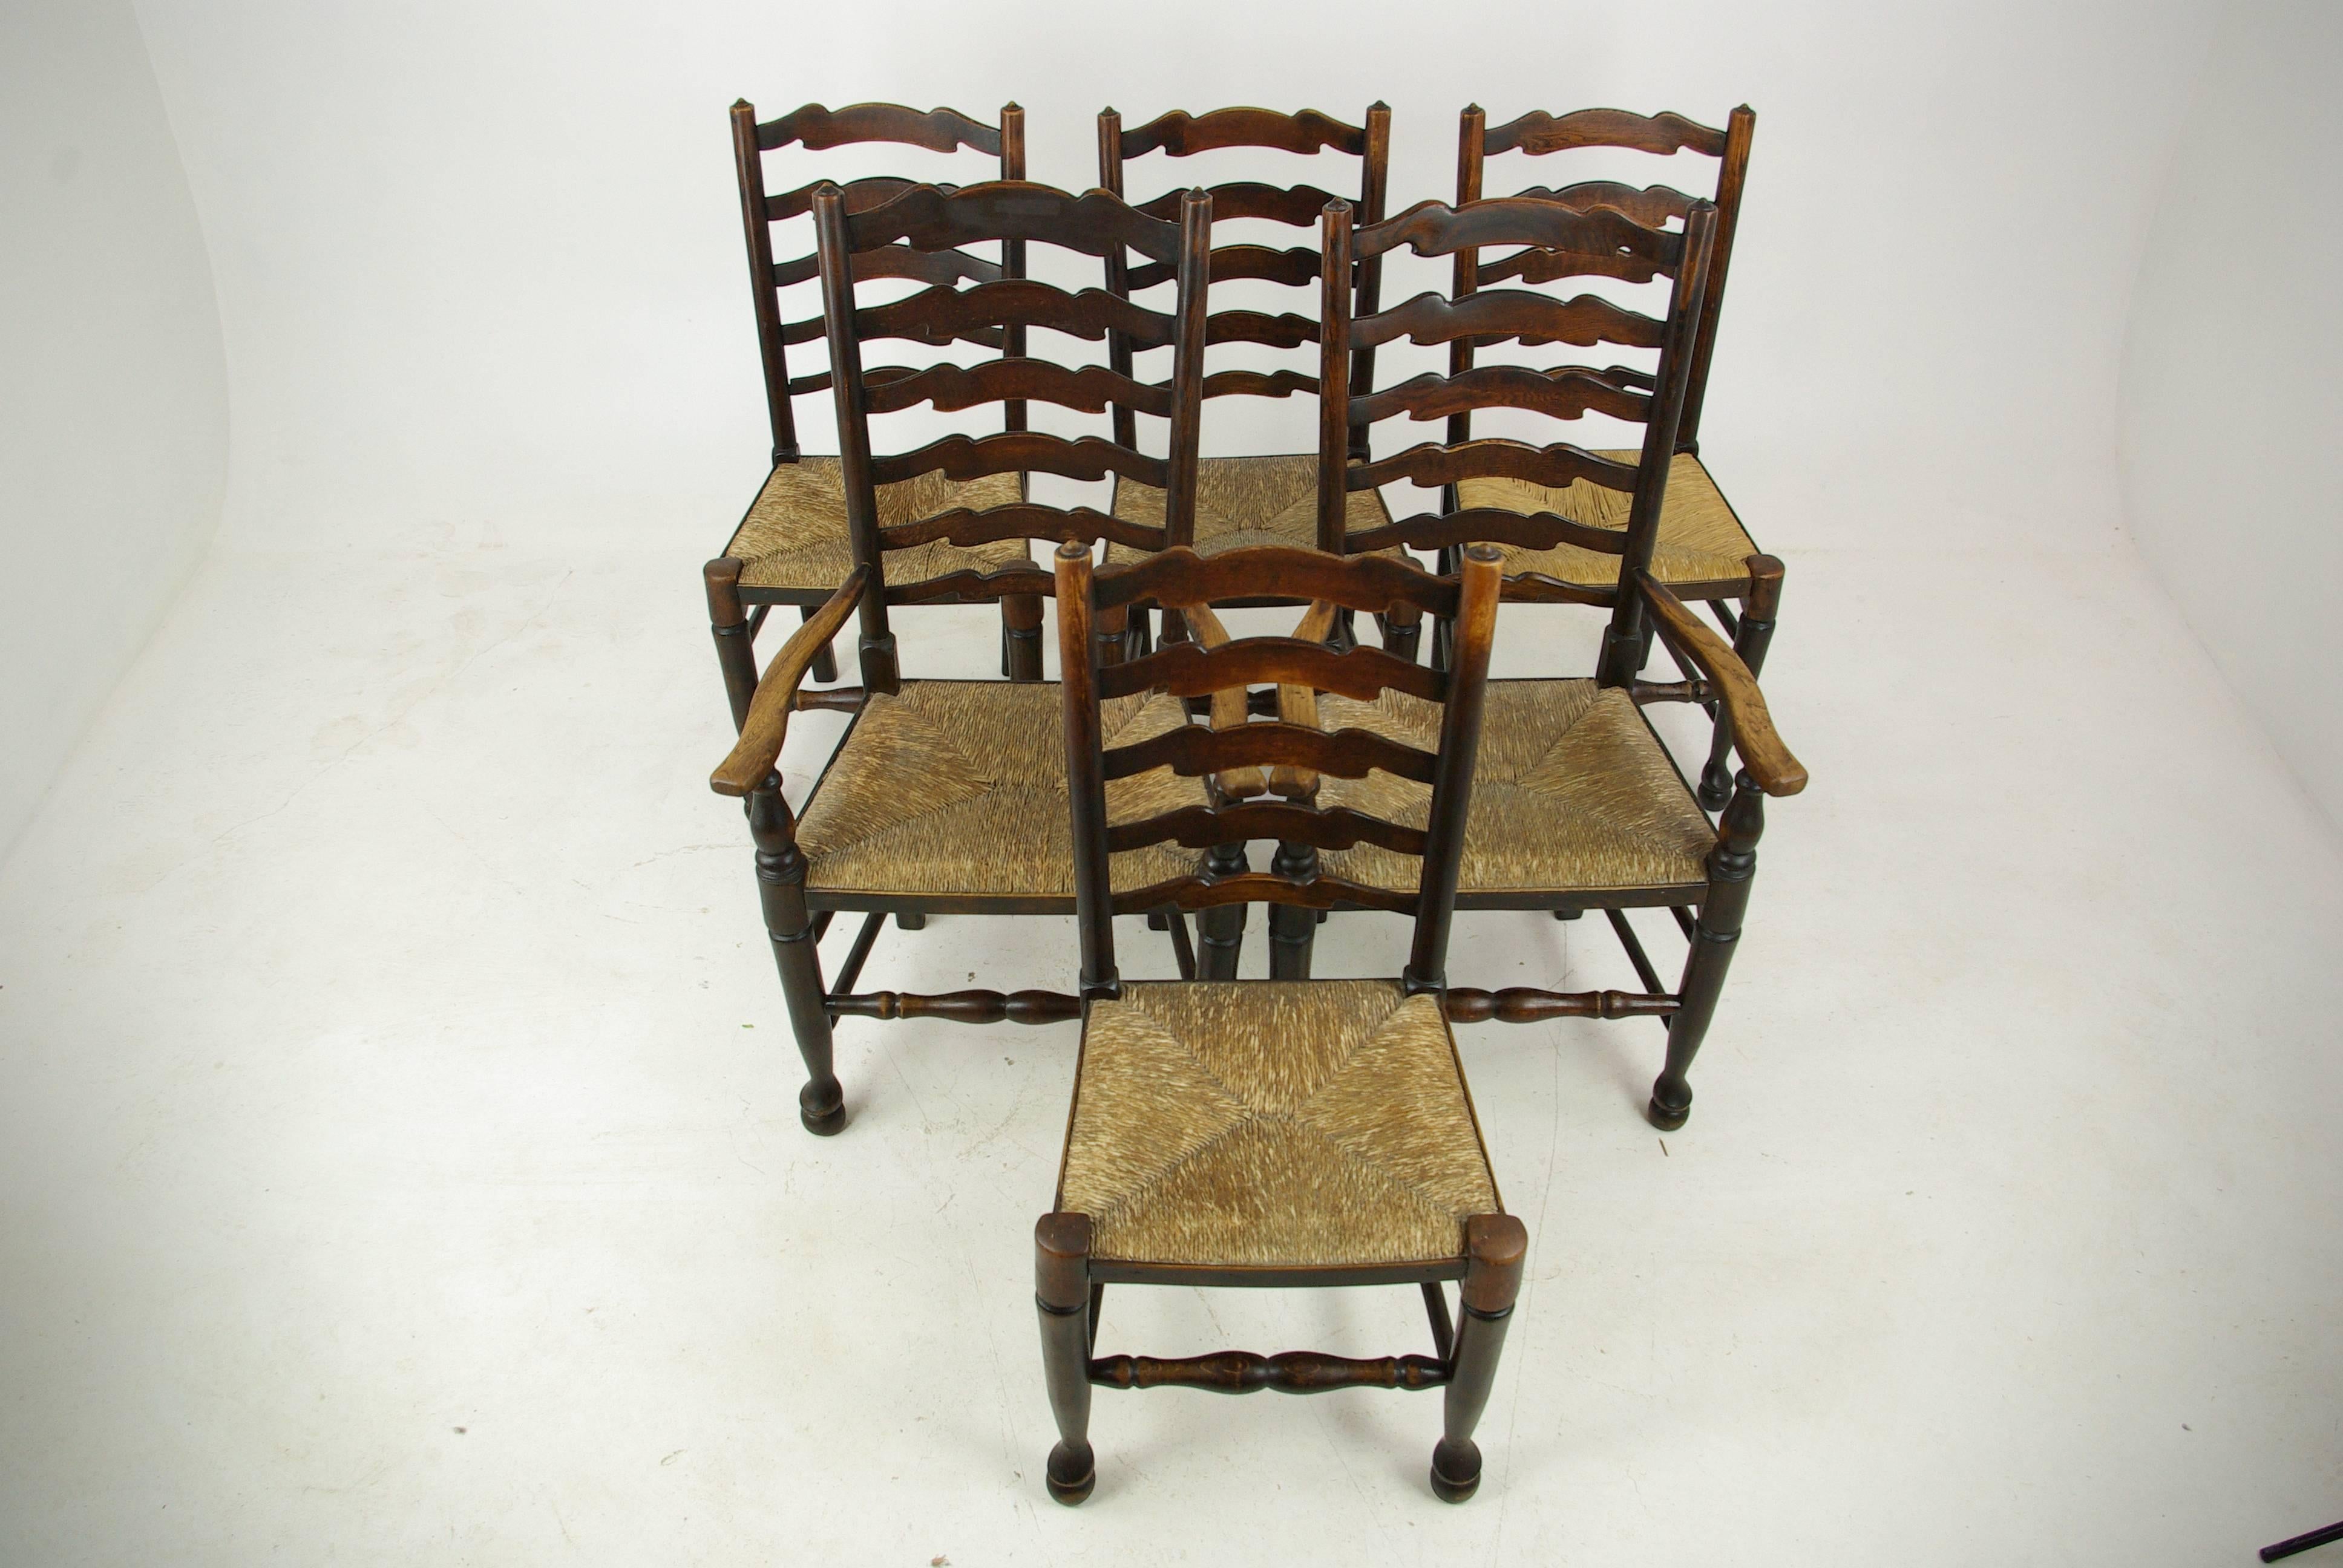 Antique dining chairs, farmhouse rush chairs, six chairs, Scotland, 1930, antique furniture, B1014

Scotland, 1930
Solid ash and elm construction
Original finish
Ladder Back Farmhouse Chairs
Shaped top rails with finials
Graduated wavy shaped